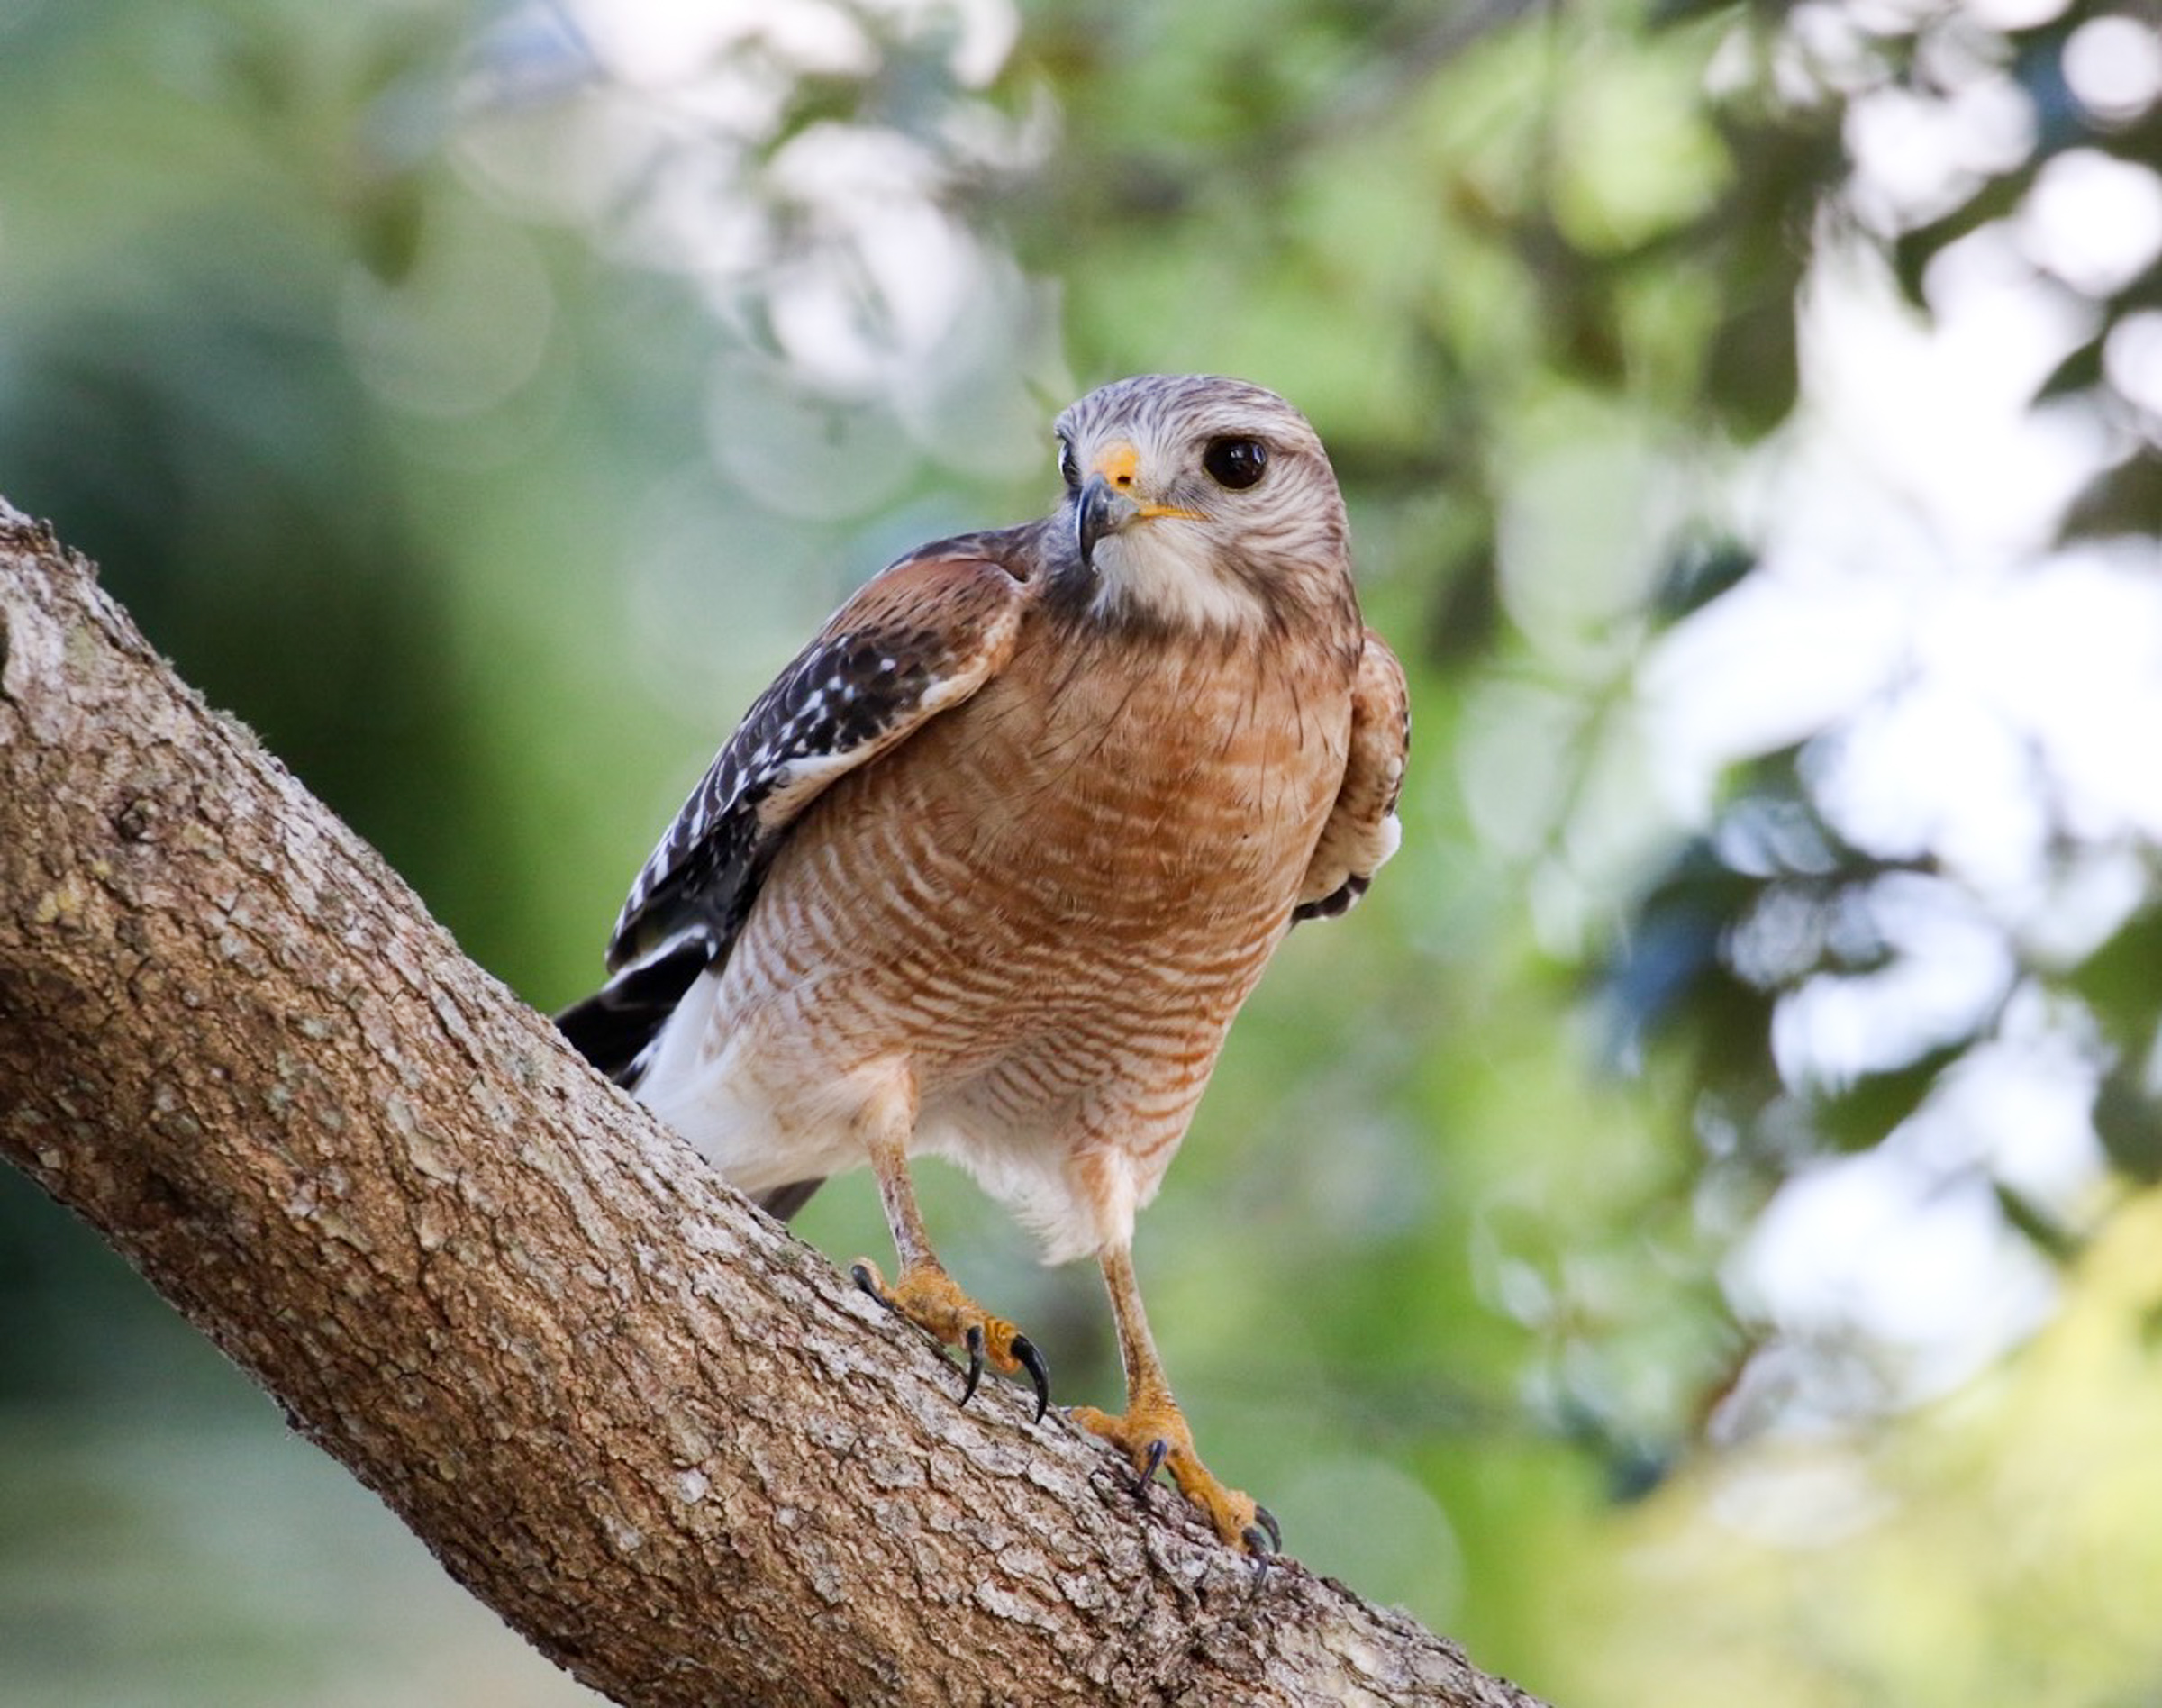 Red-shouldered Hawk sitting on a tree branch, with leaves in the background. Photo: David Held/Audubon Photography Awards.